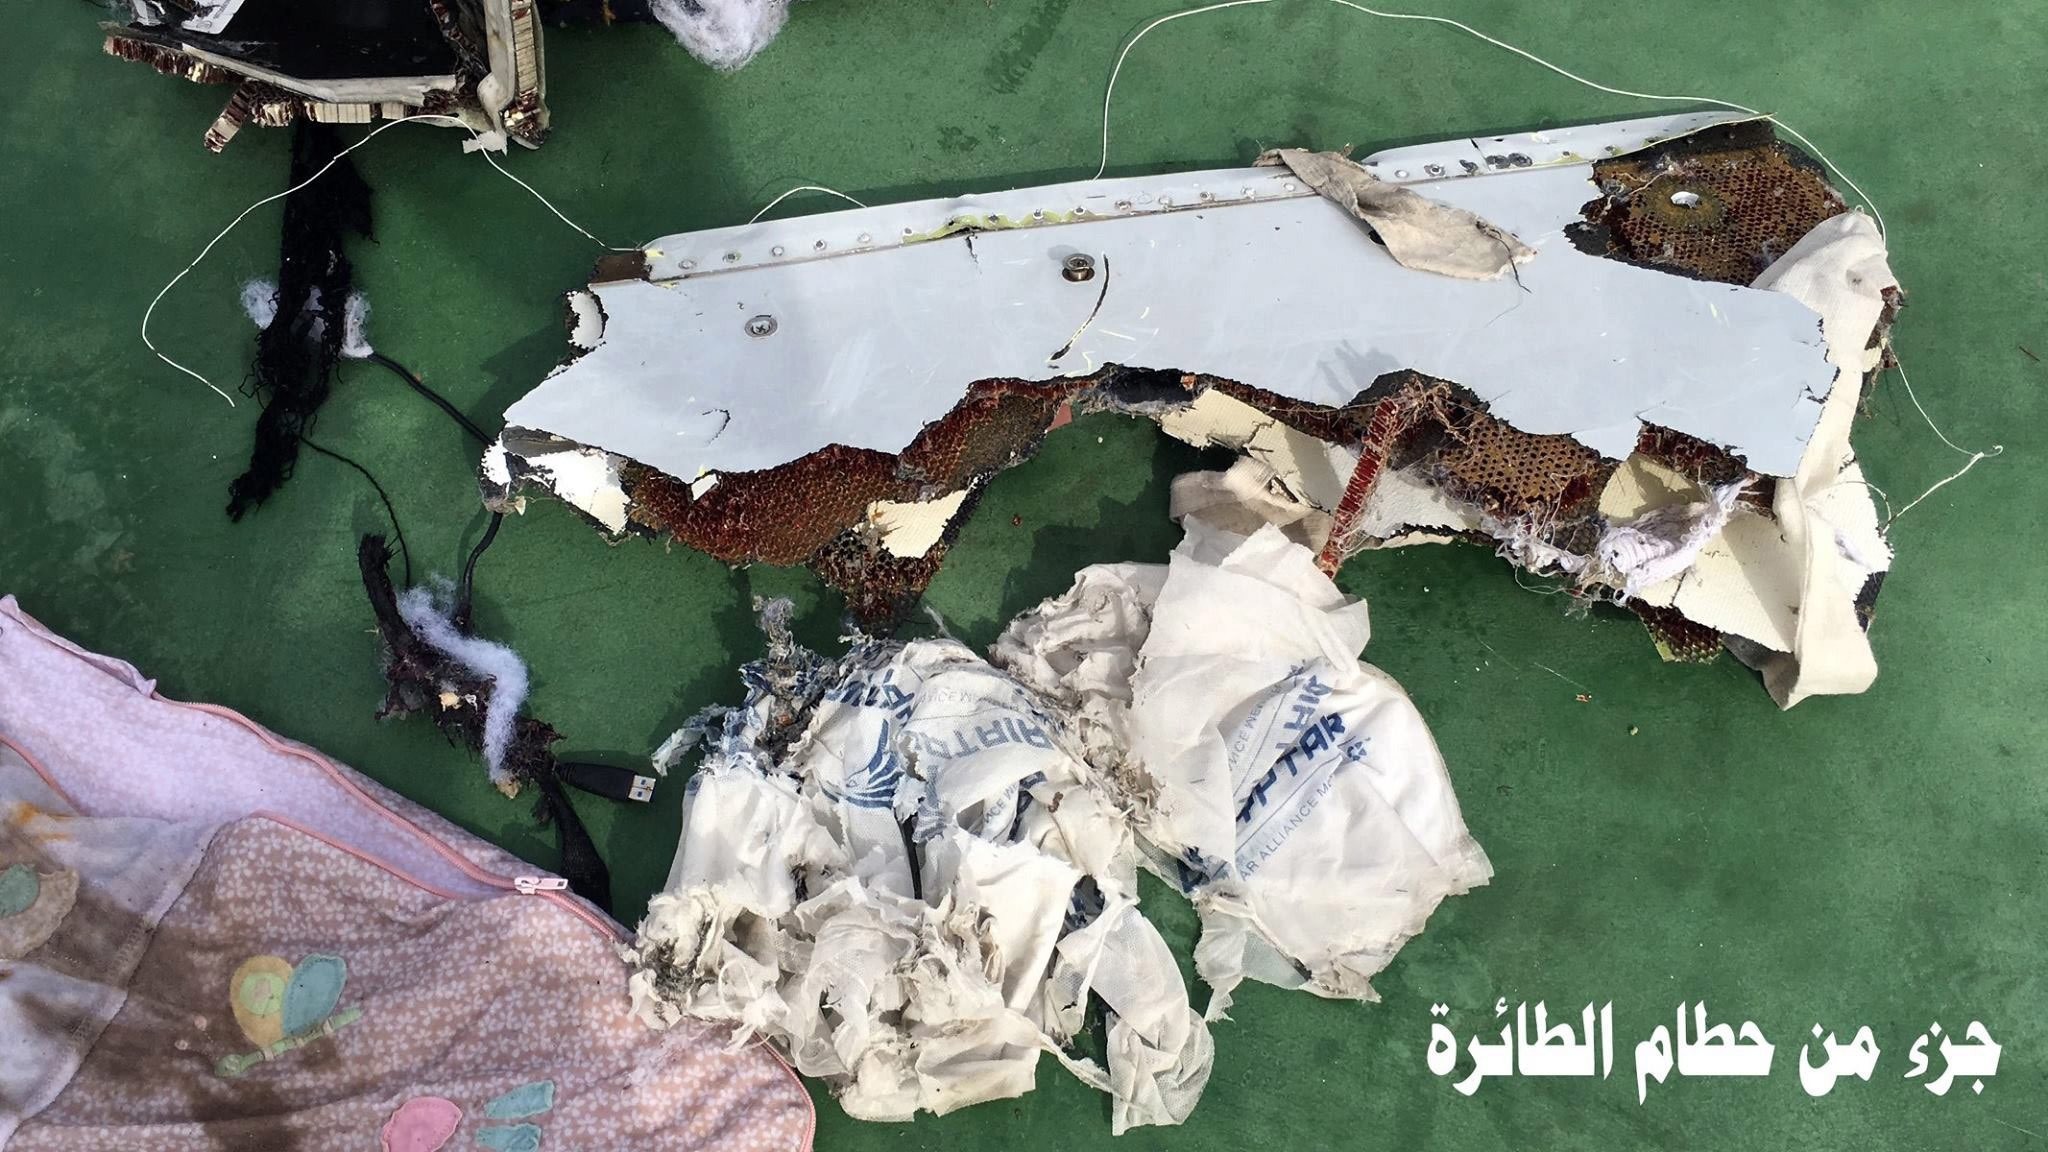 Pieces of a chair from the EgyptAir MS804 flight missing at sea, unspecified location in Egypt.